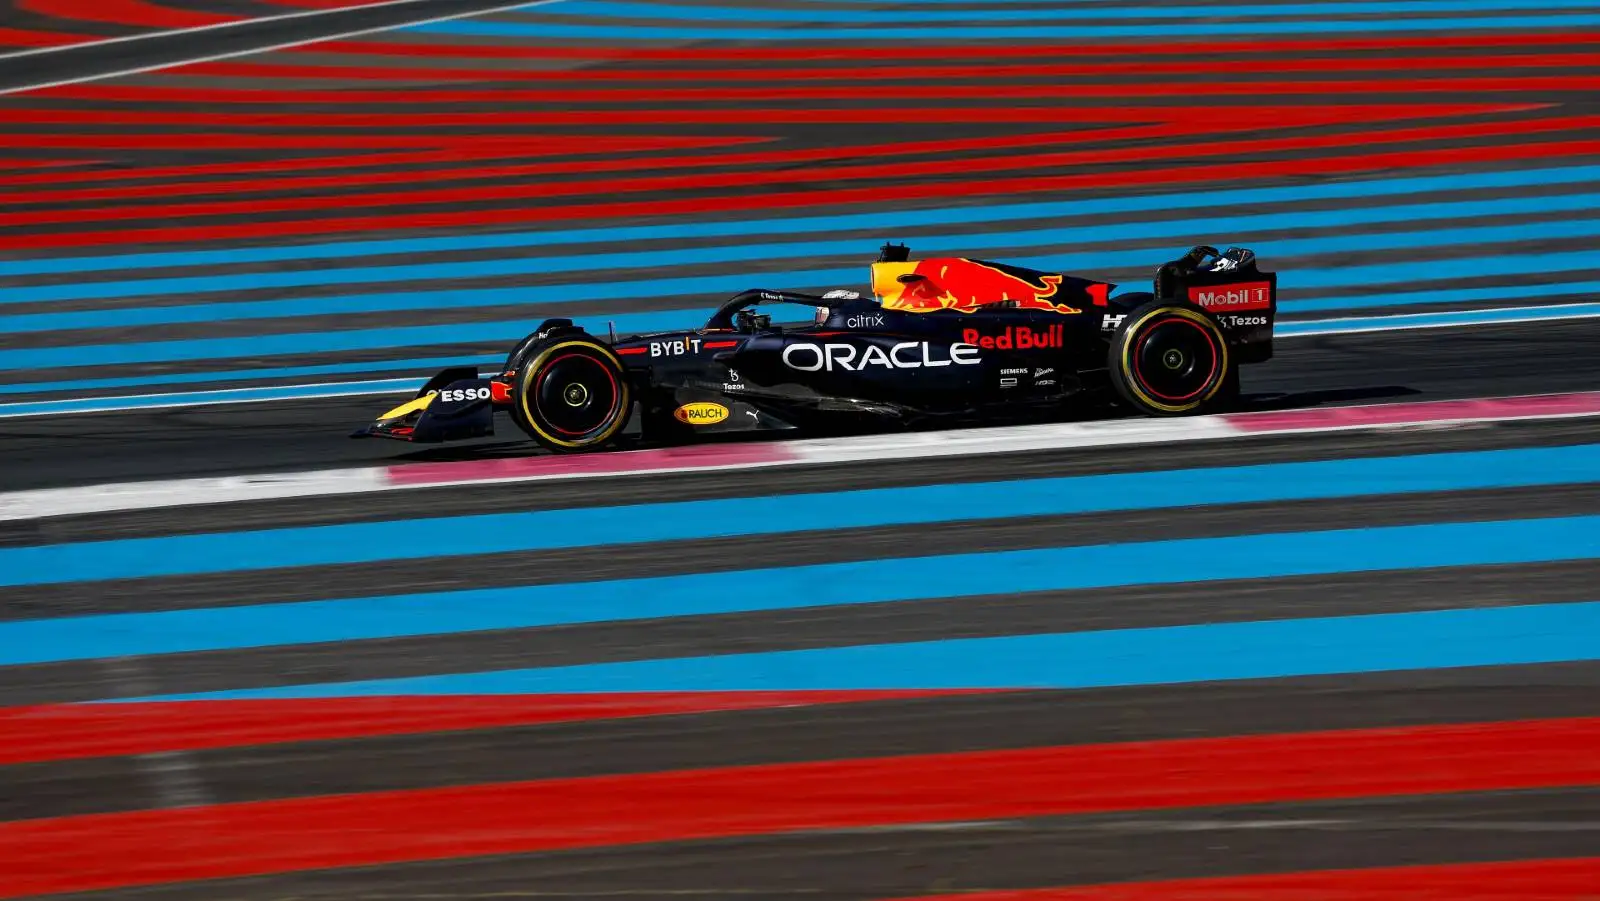 Max Verstappen's Red Bull in free practice for the French GP. Paul Ricard July 2022.